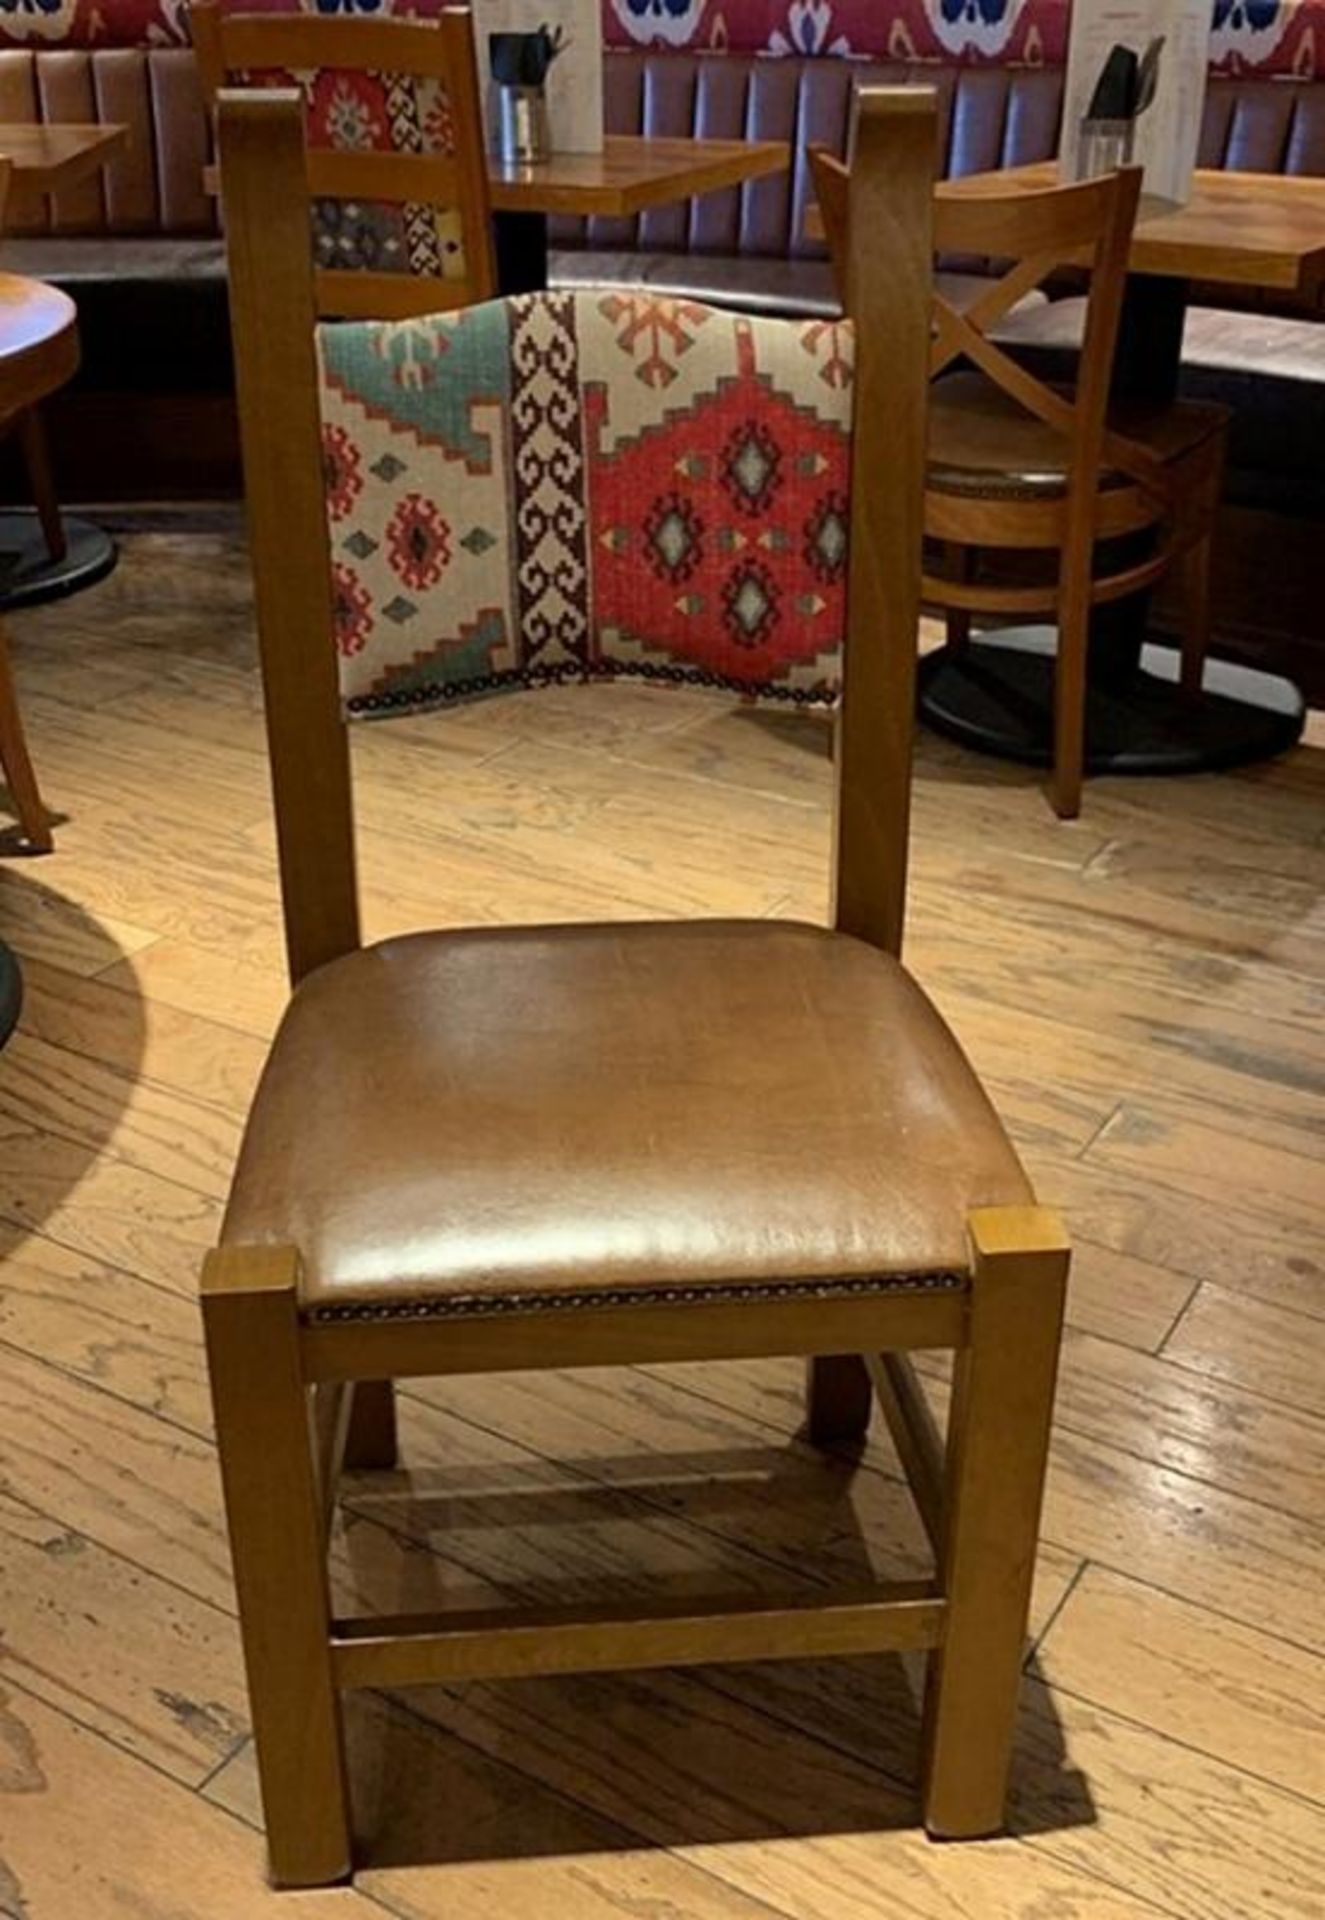 4 x Mid Height Upholstered Wooden Dining Chair - Dimensions: H100cm W46cm - CL339 - From a Popular M